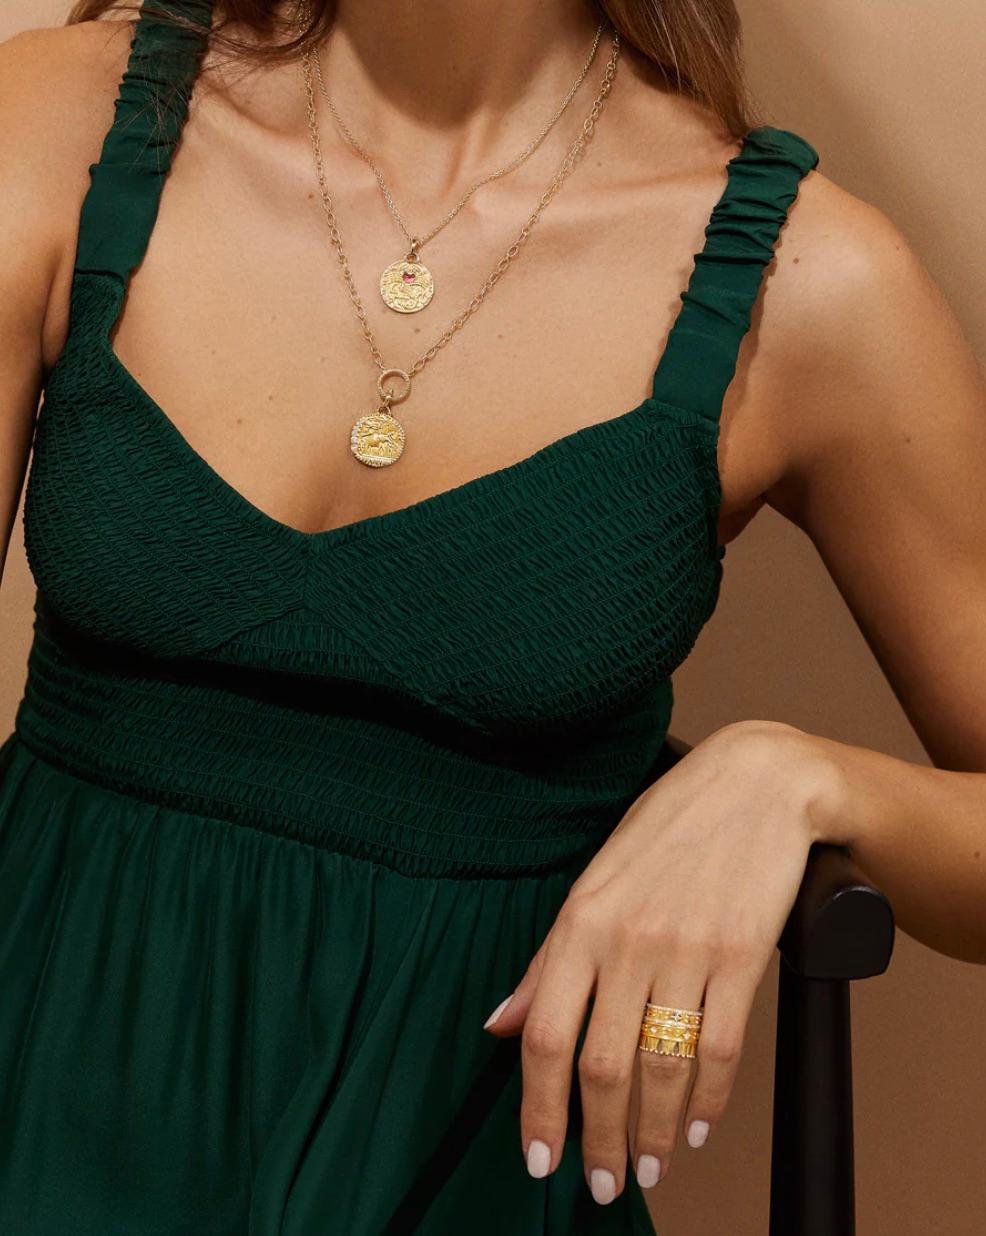 kaitlan collins necklace medallion meaning